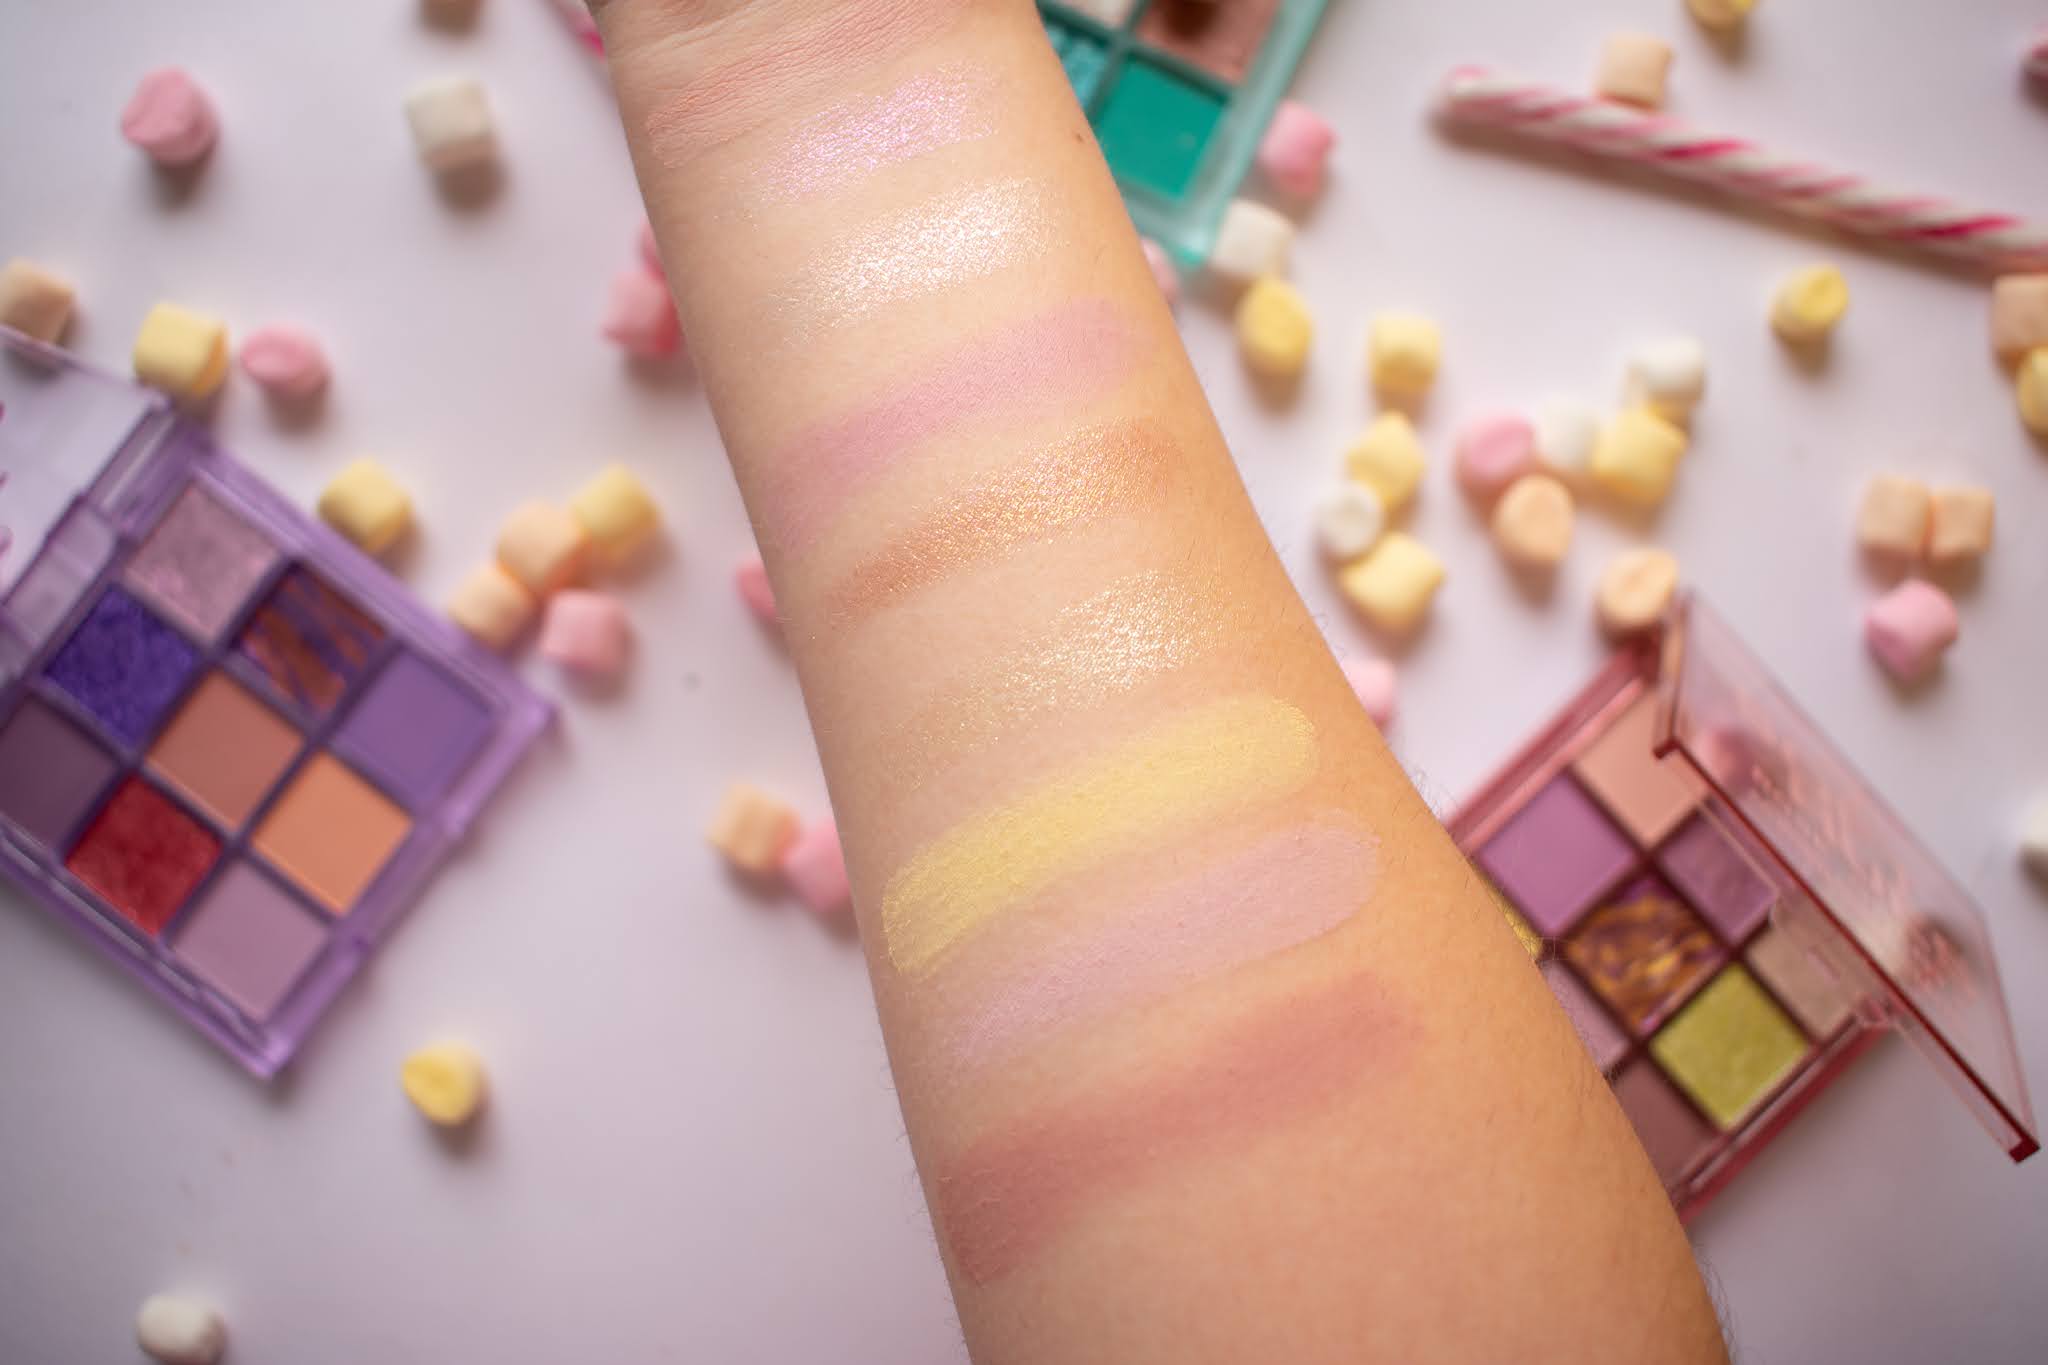 Huda rose Pastel Obsessions soft hues w7 swatches